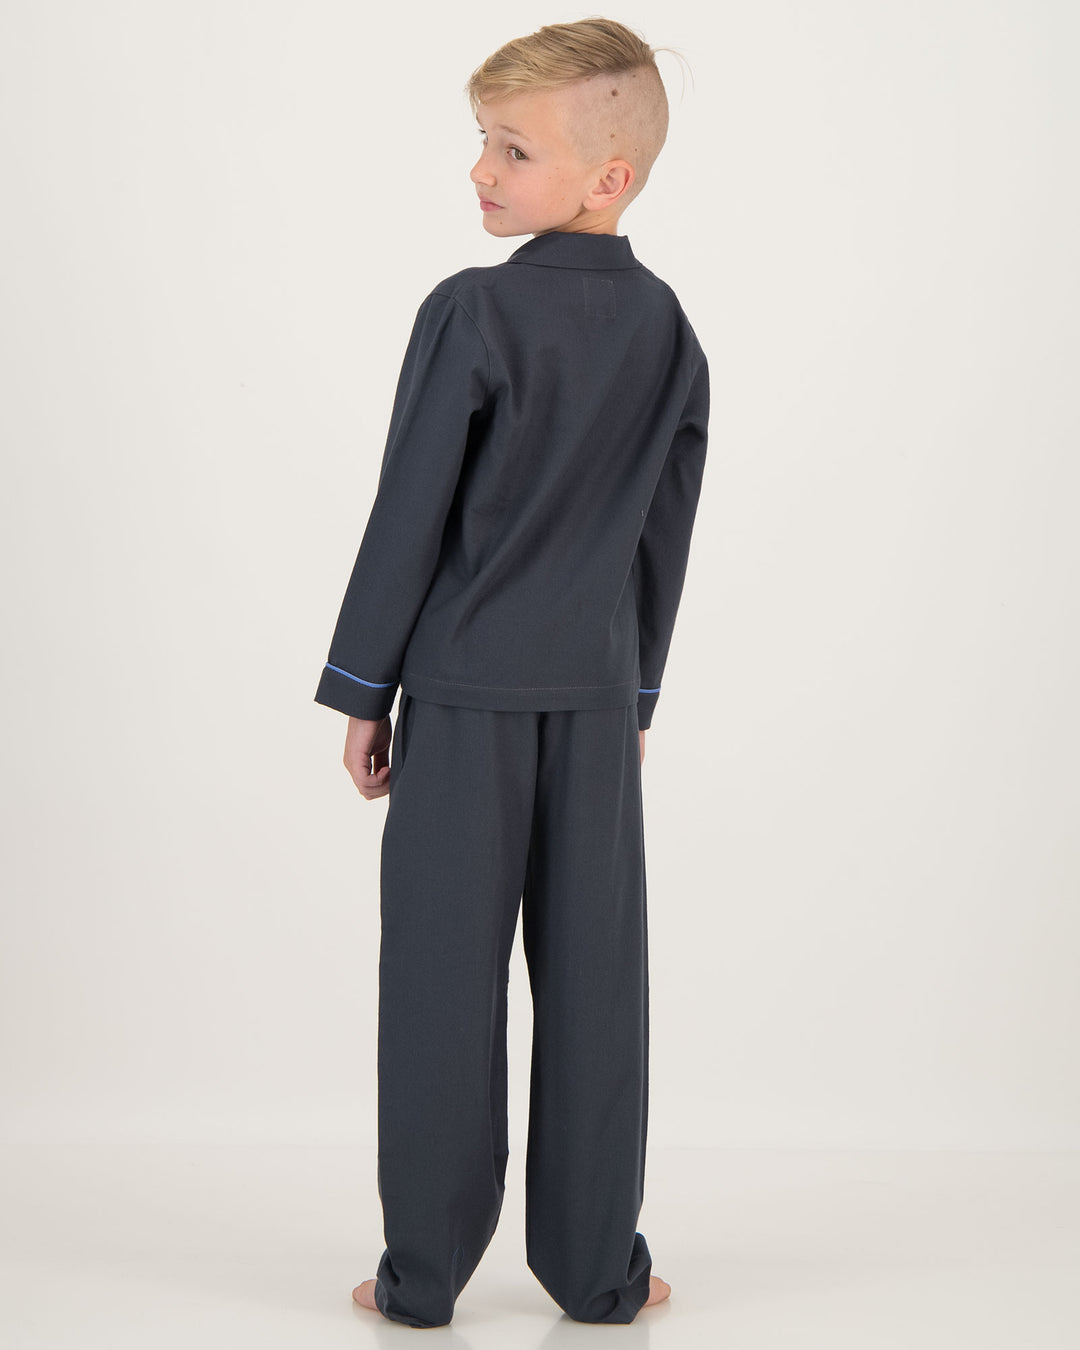 Boys Flannel Pyjamas Charcoal with Blue Piping Back - Woodstock Laundry SA